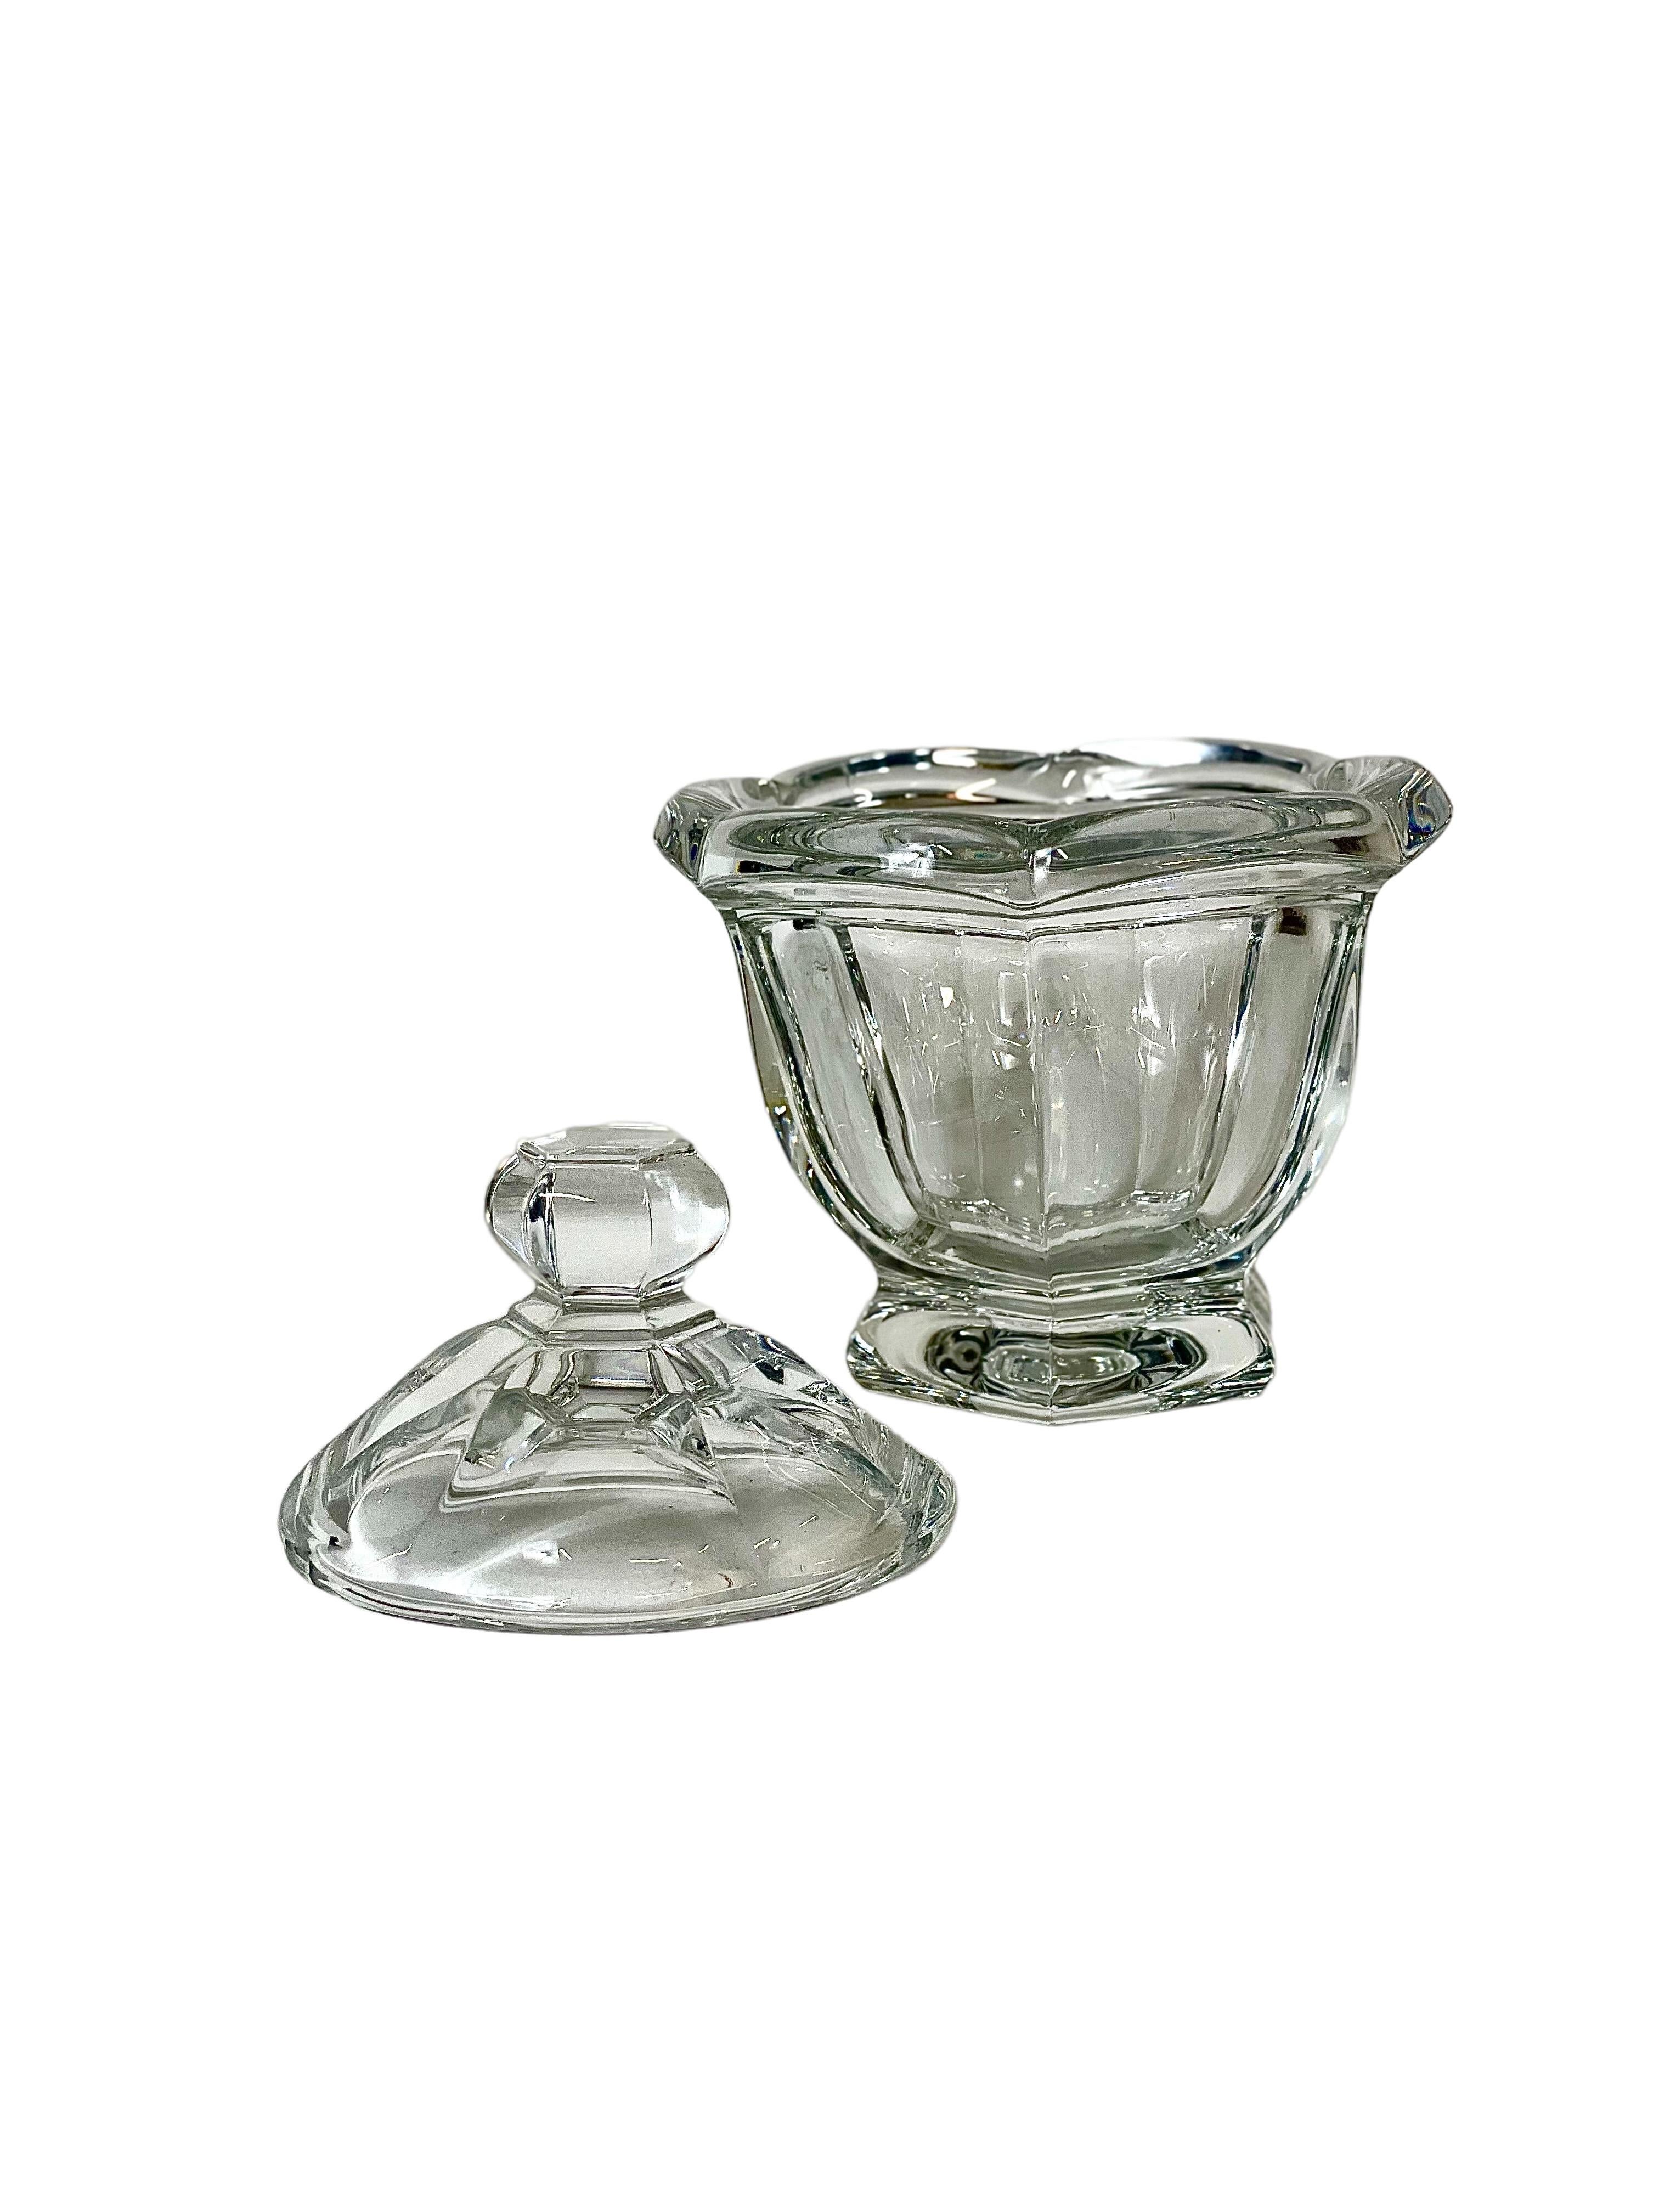 A sparkling crystal bonbonnière, or sweets dish with fitted lid, made by Baccarat – the renowned French manufacturer of luxury, fine crystal, and stamped with the maker's mark on the base. In excellent condition, this elegant little jar has a